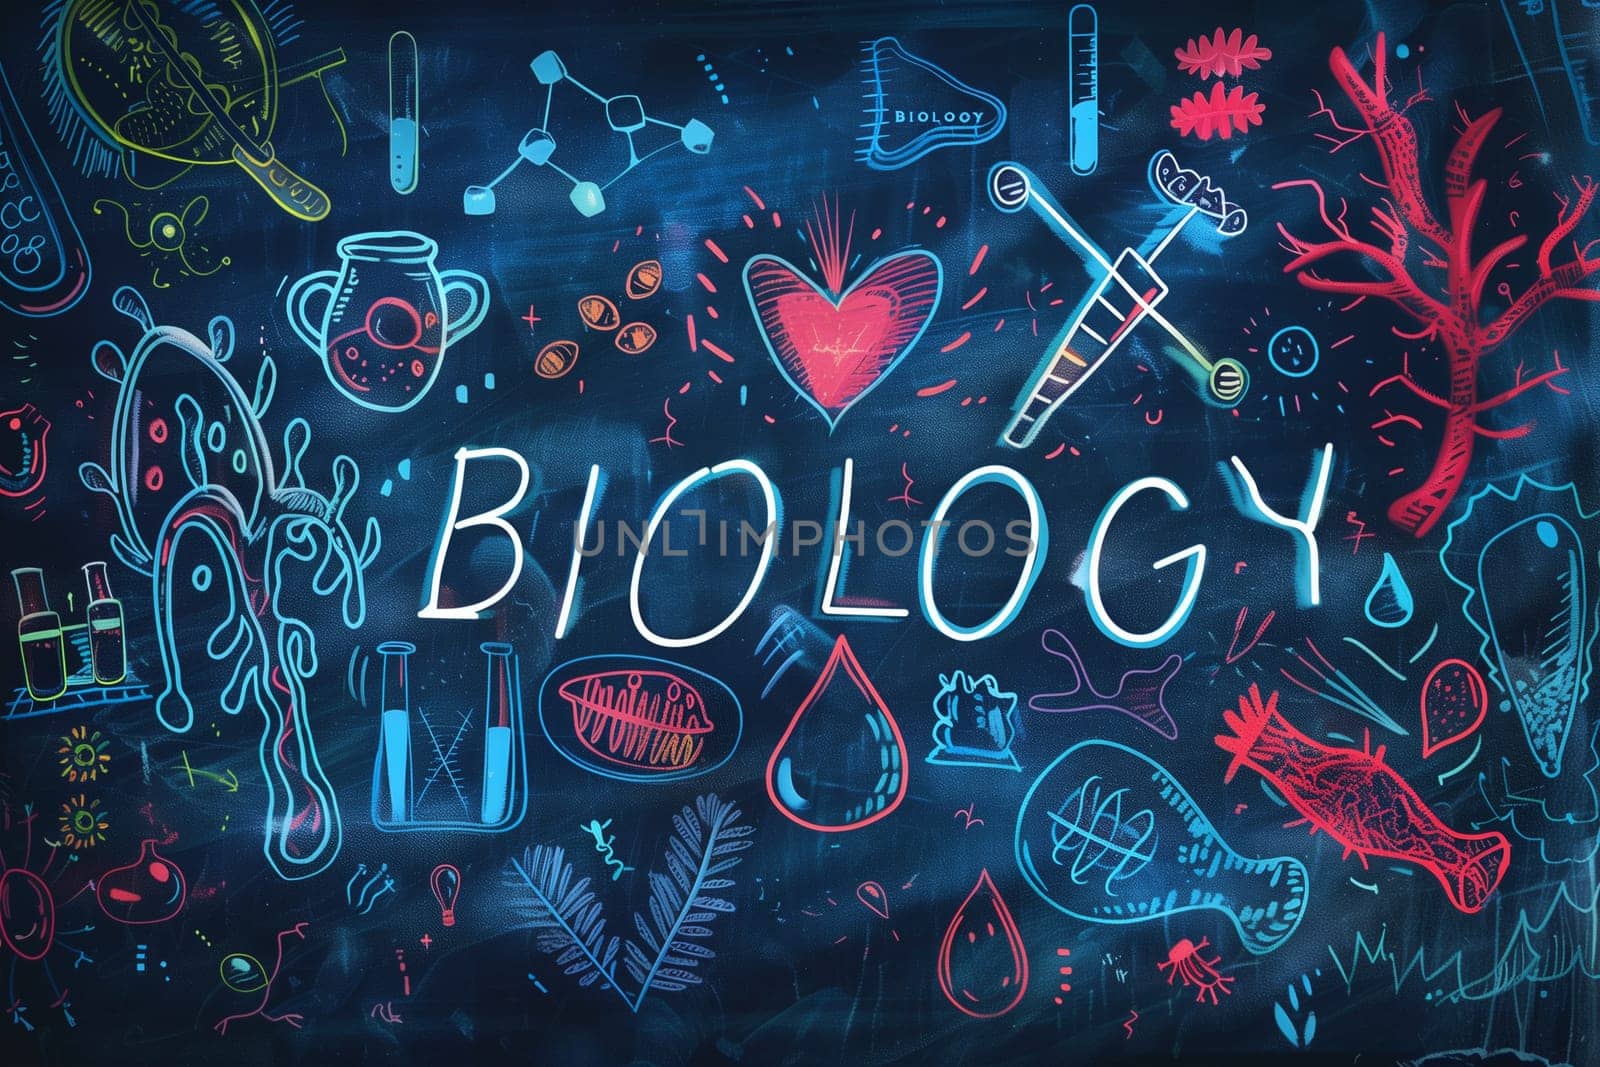 A chalkboard with the word biology written on it in white chalk, against a dark green background.